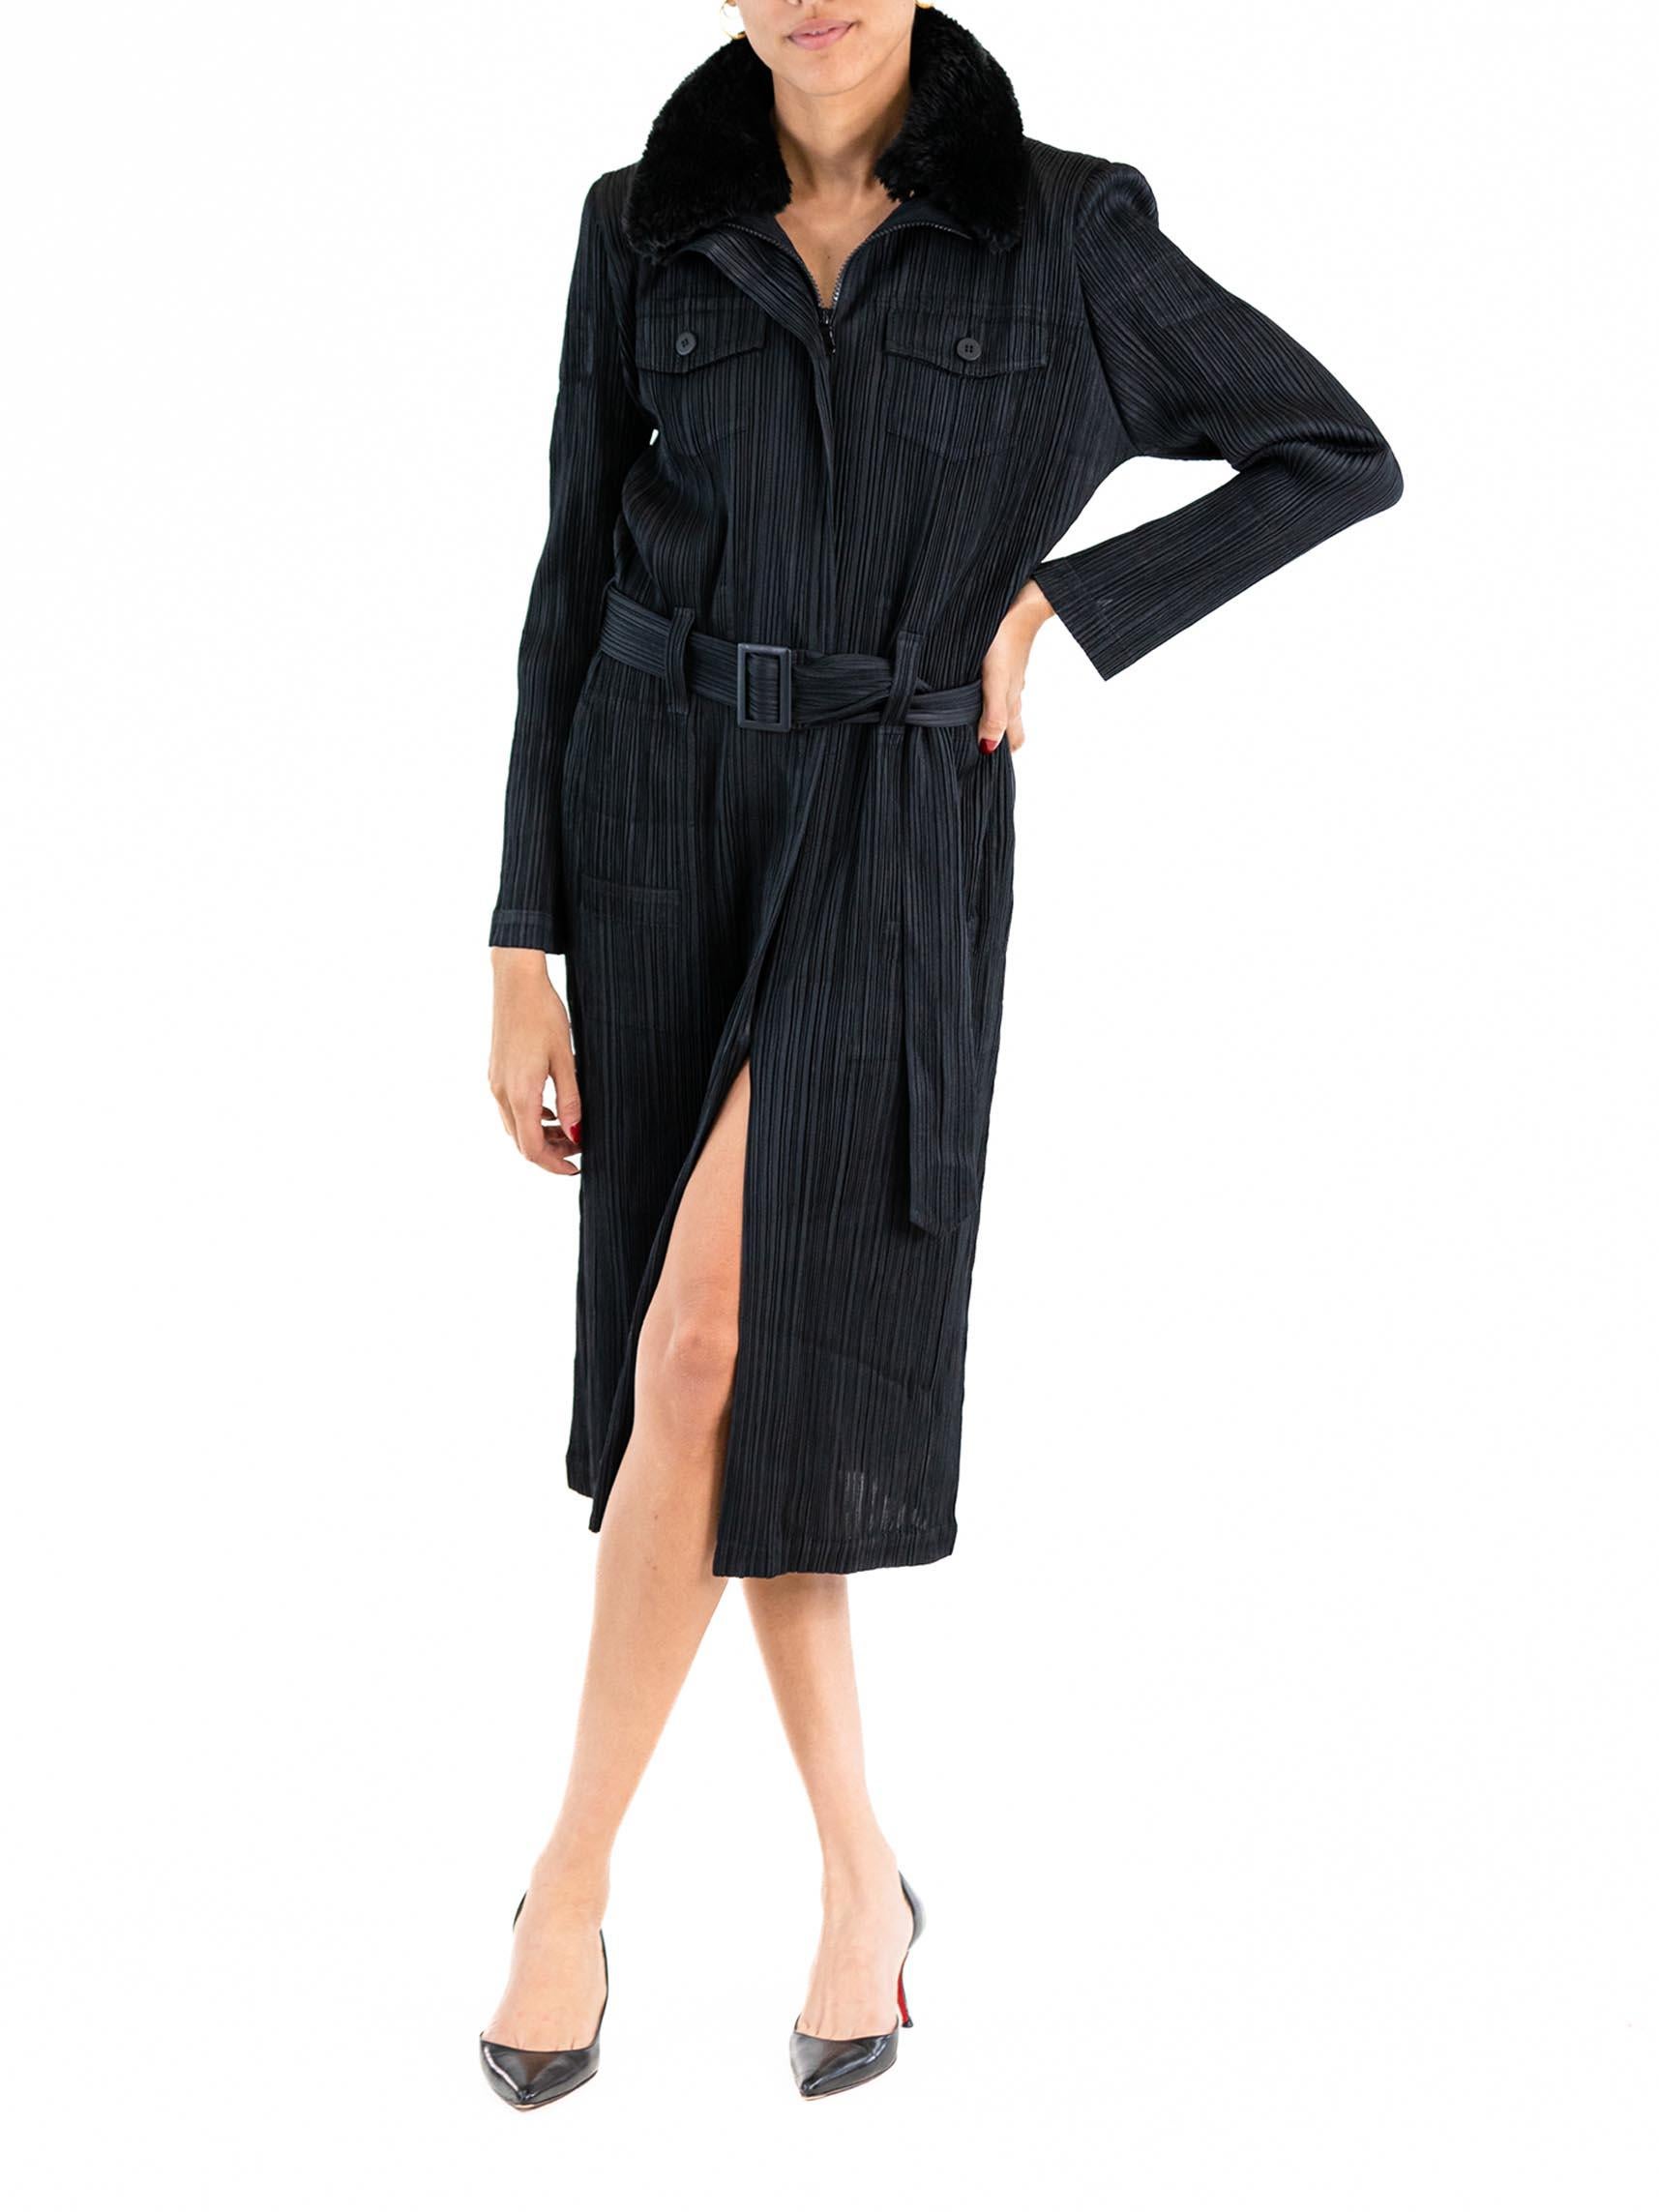 2000S ISSEY MIYAKE Black Polyester Pleated Long Trench Jacket With Faux Fur Col For Sale 2